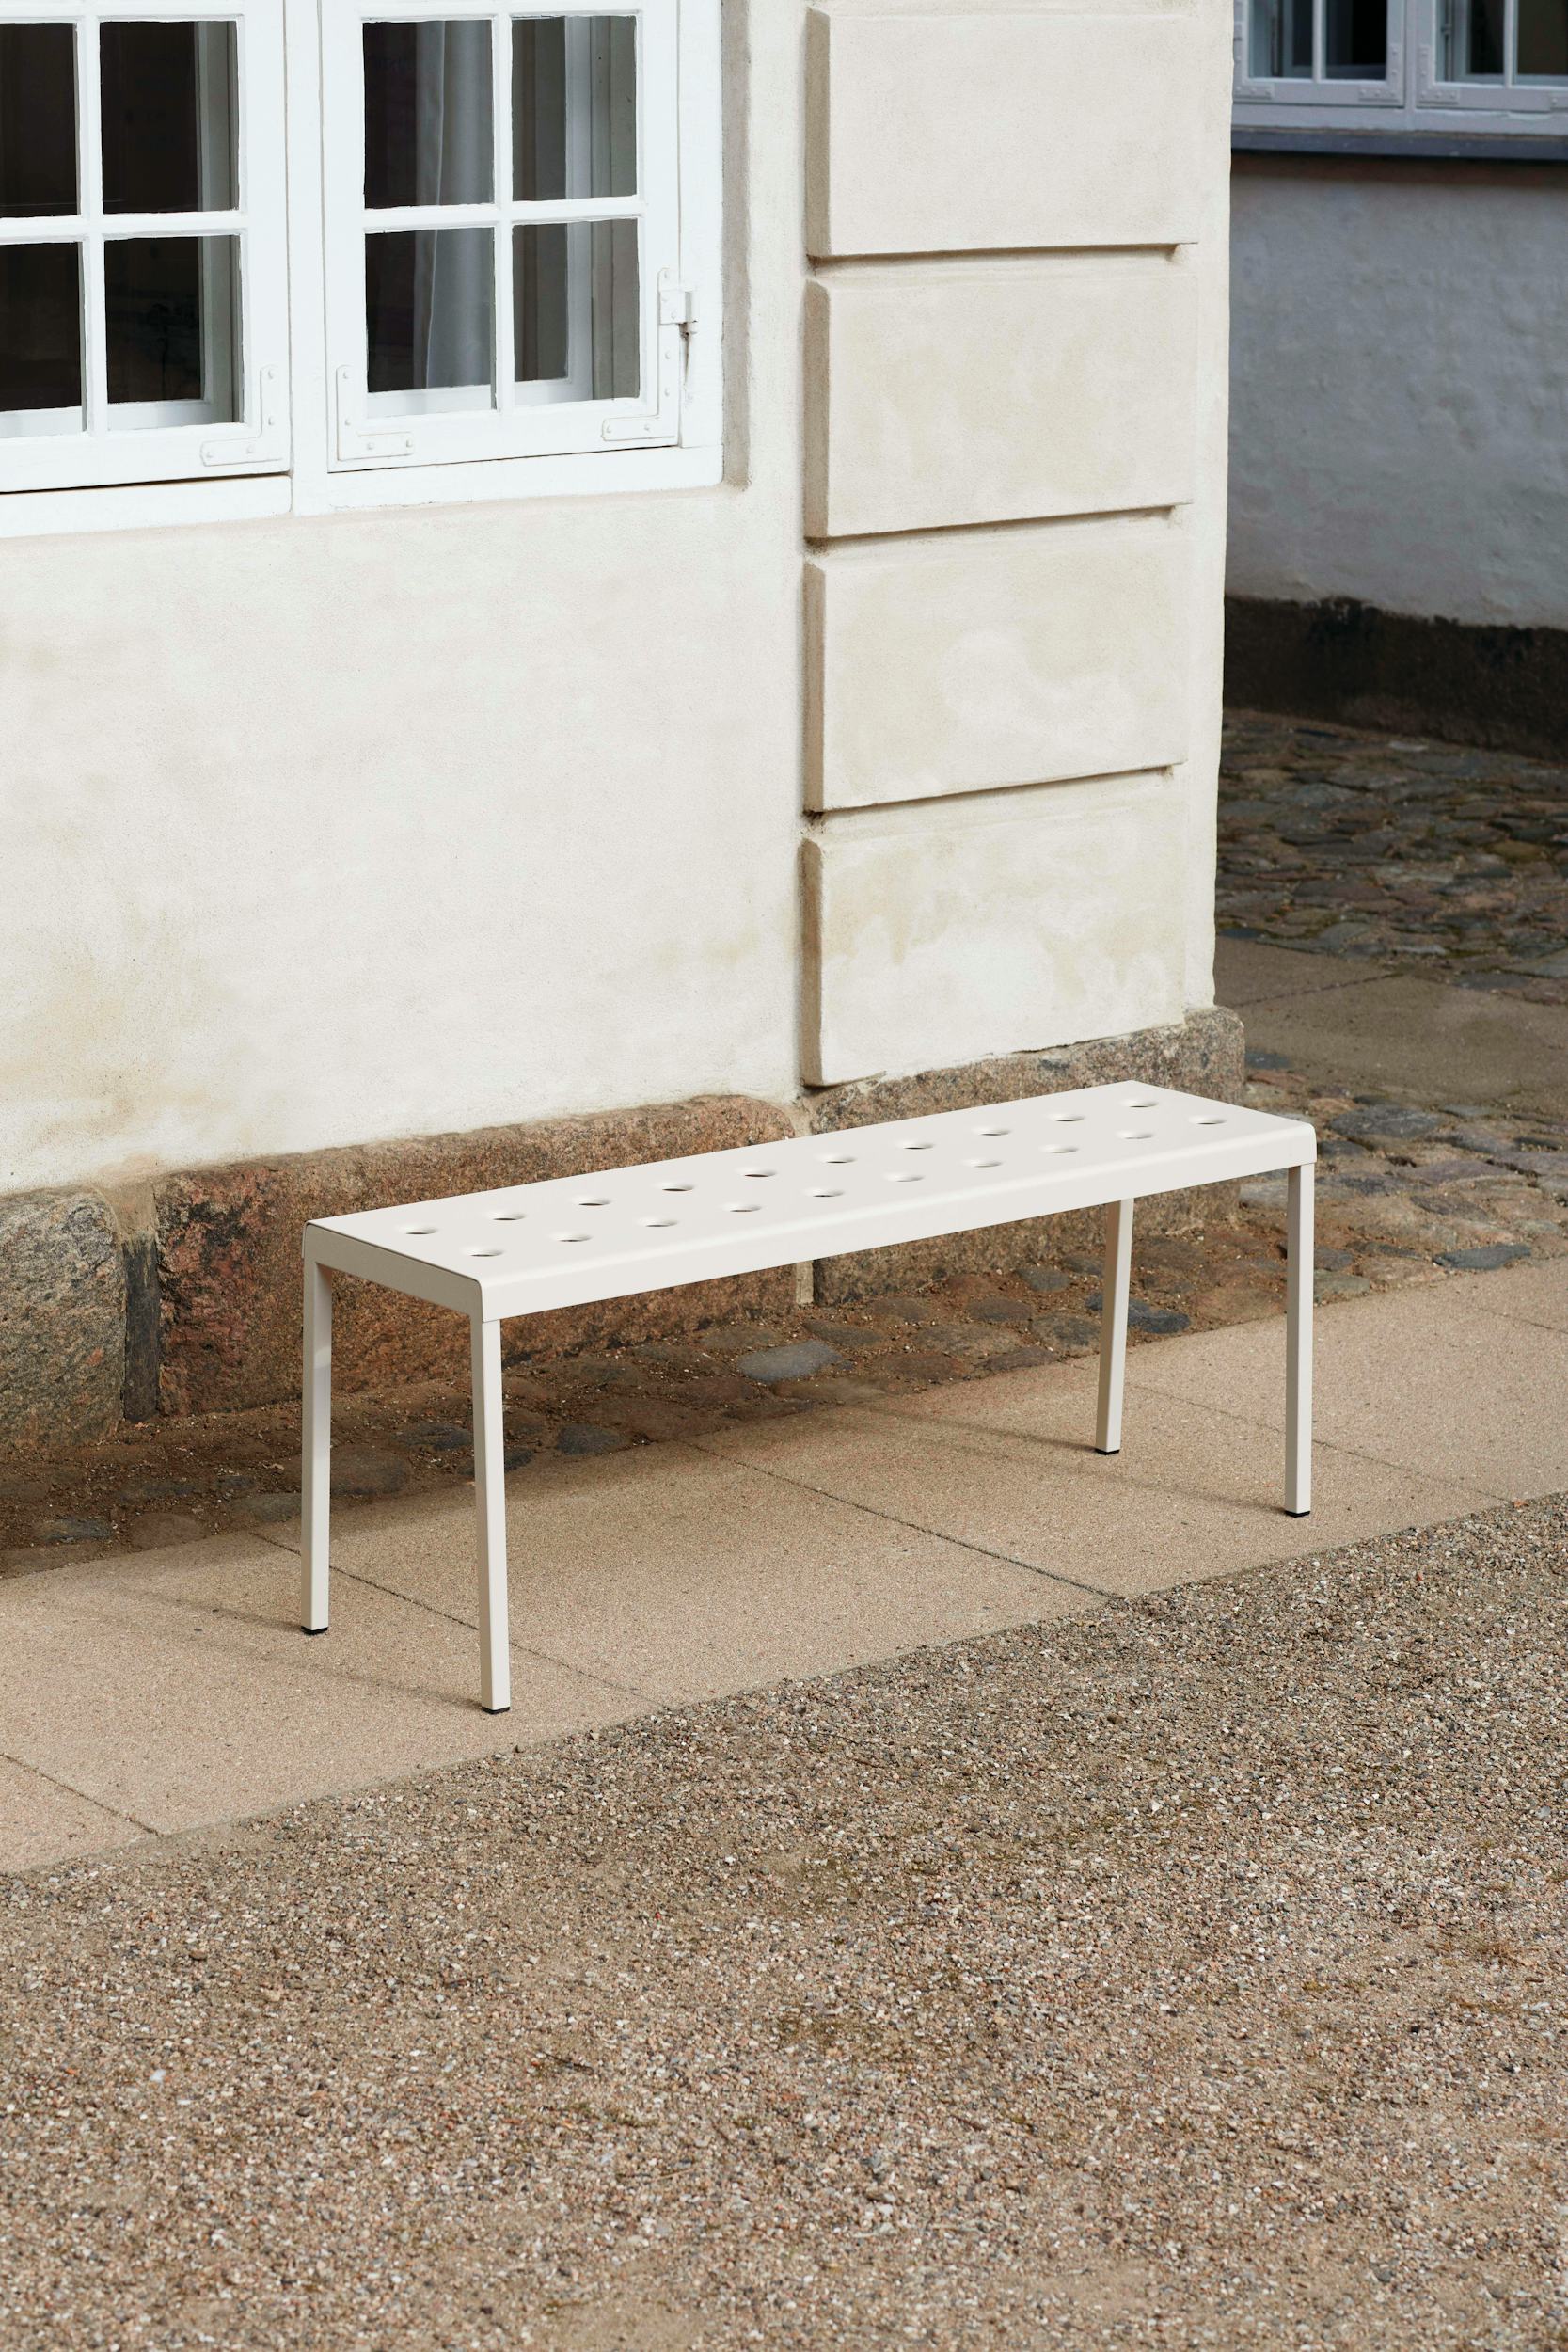 Within Backless Bench Design Reach Balcony –